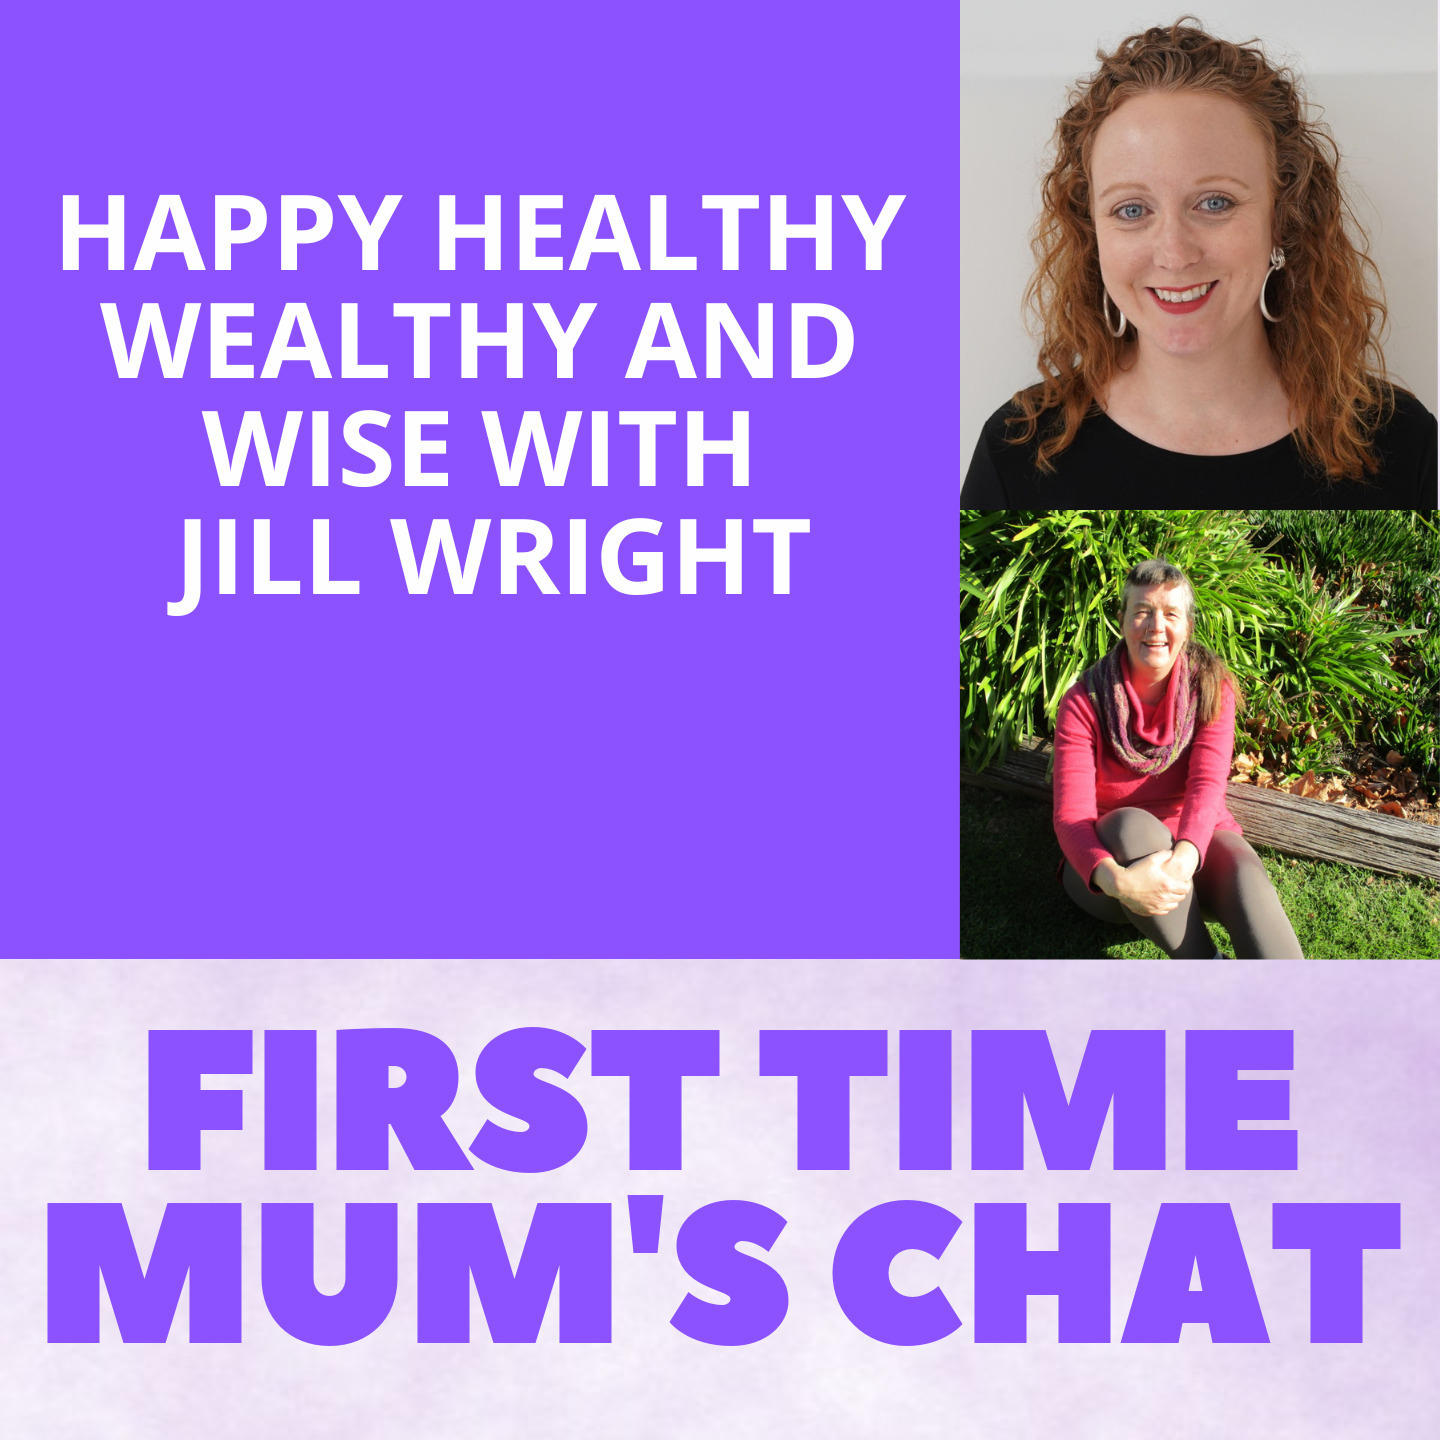 Happy Healthy Wealthy and Wise with Jill Wright